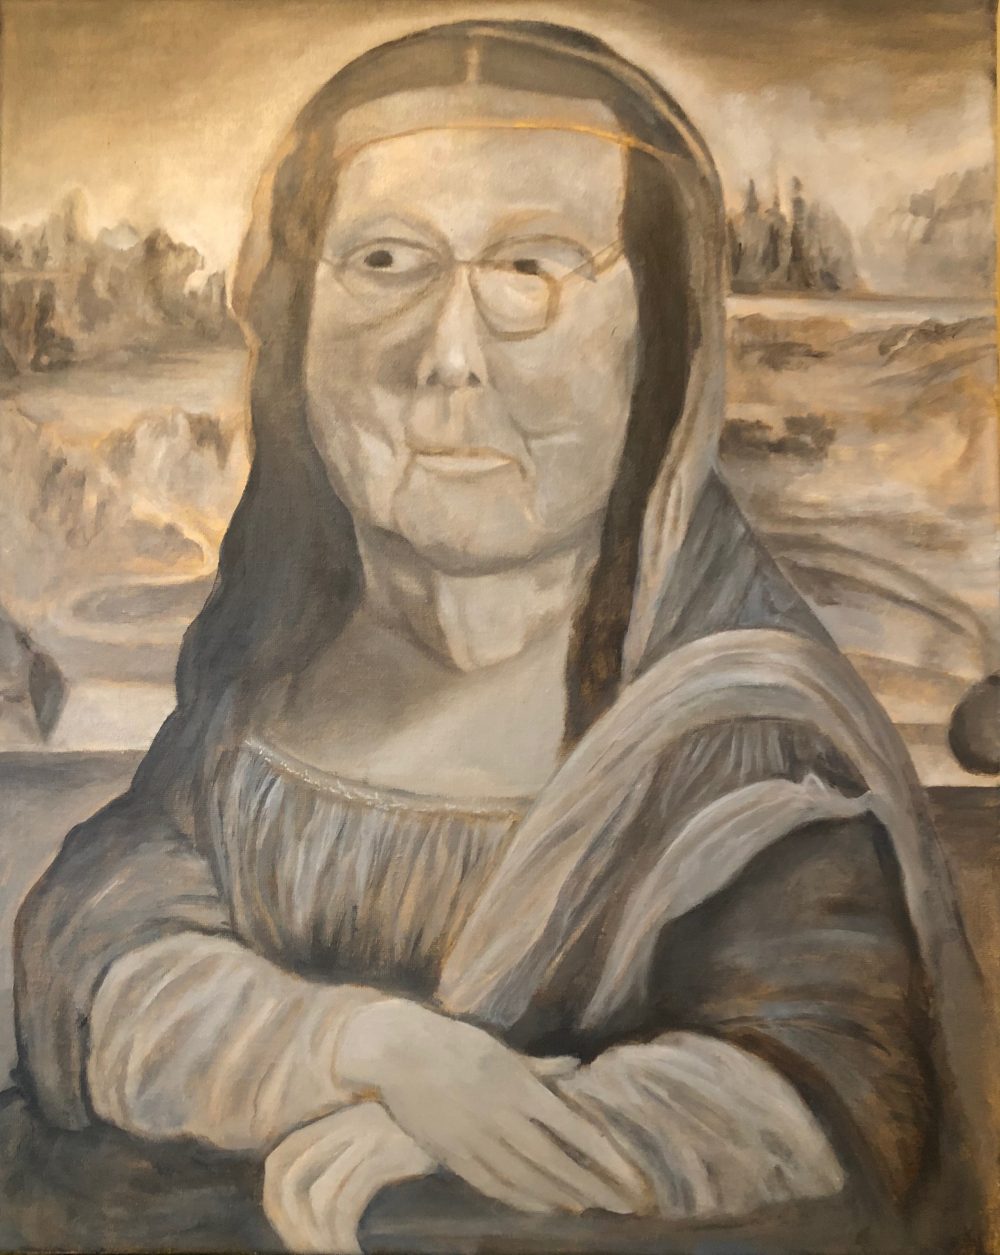 Mona Lisa's body and backdrop with Mitch McConnell's face.